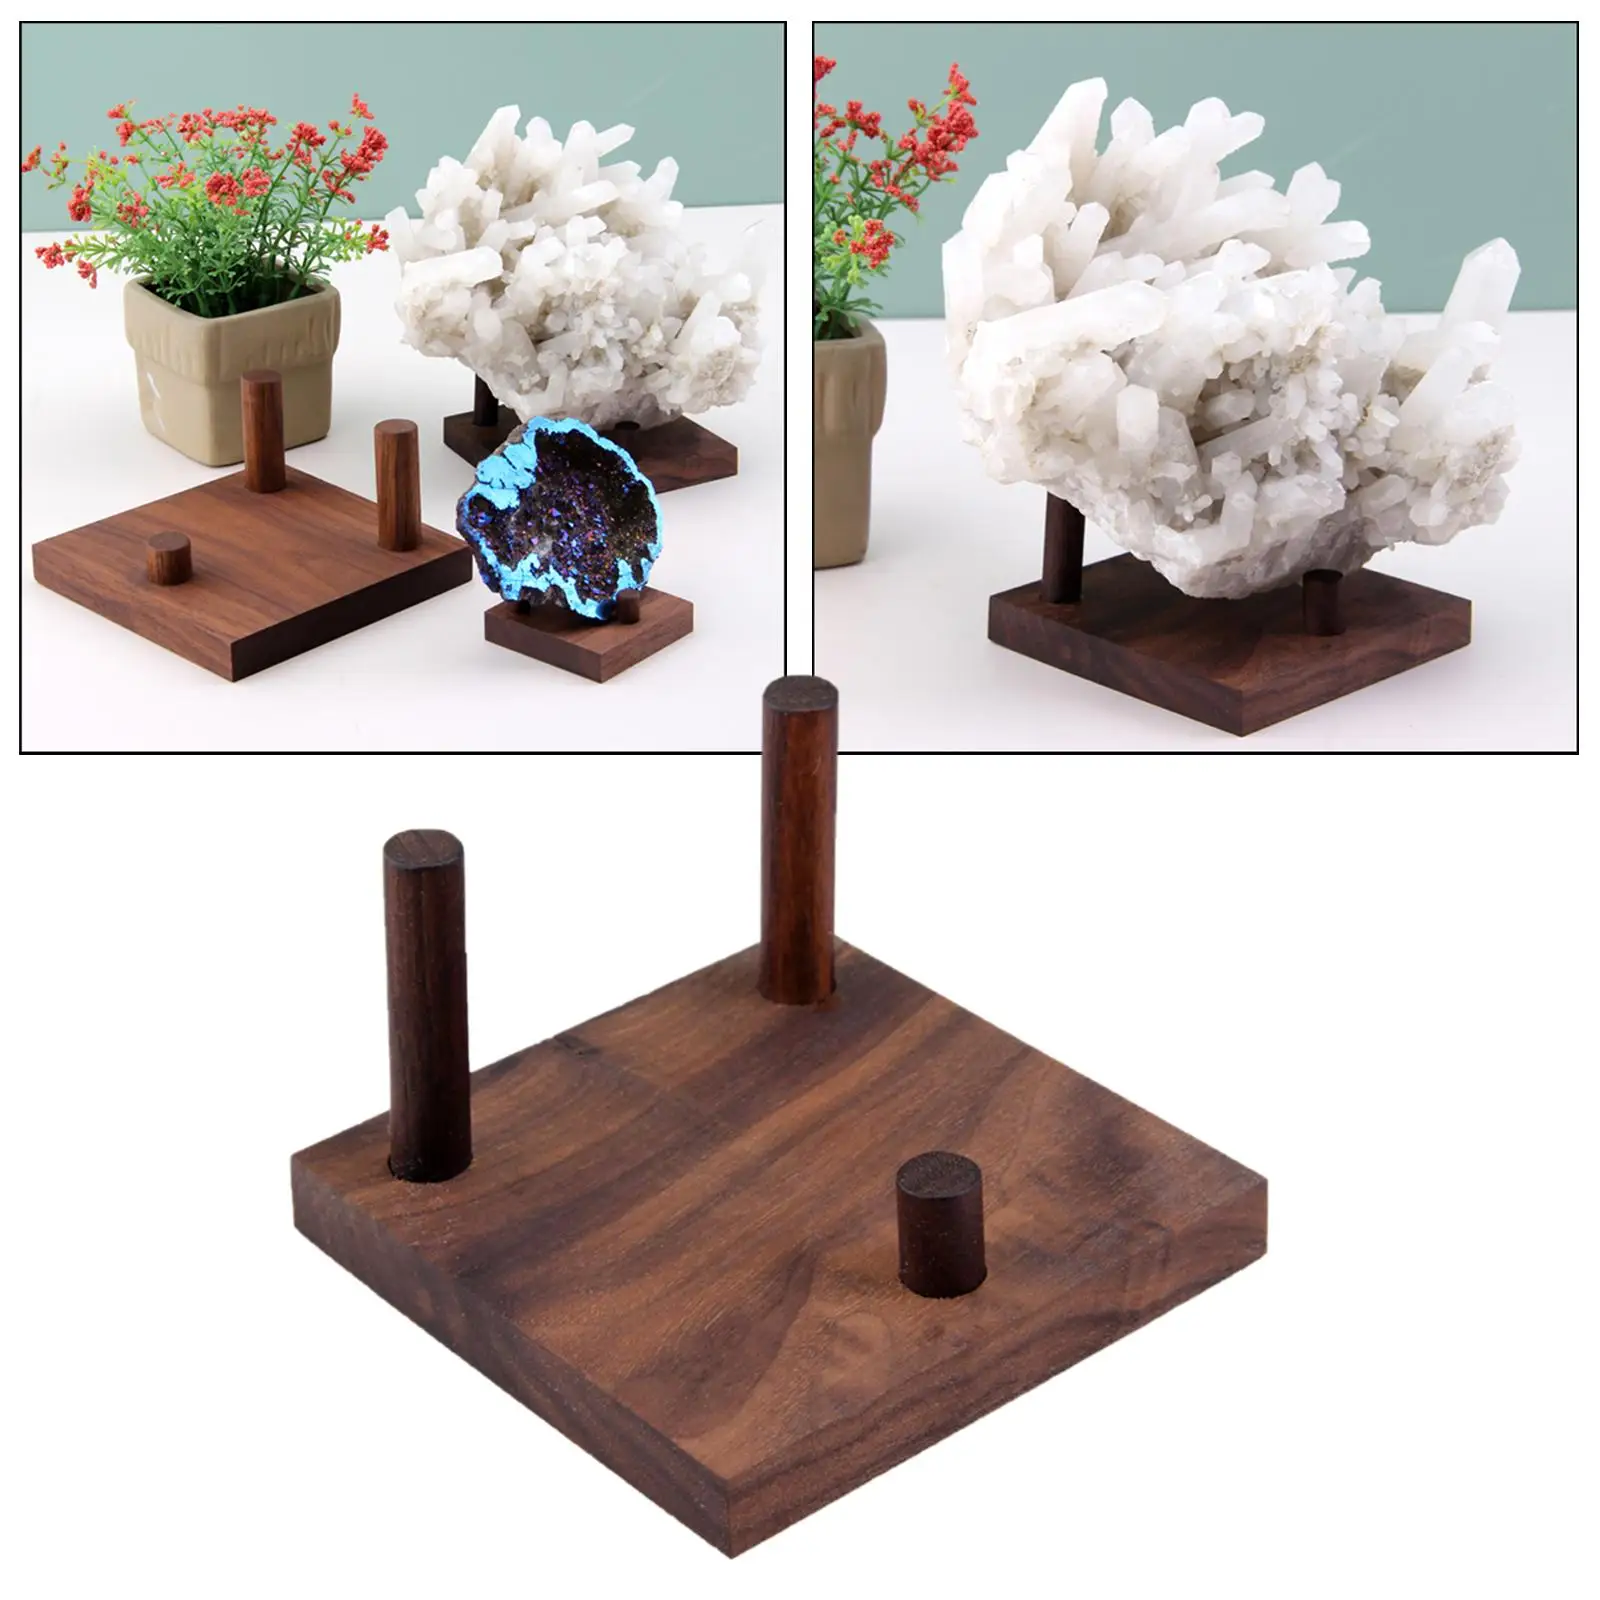 Wooden base rocks Display Holder Decorative for Museum Art Class Show Room